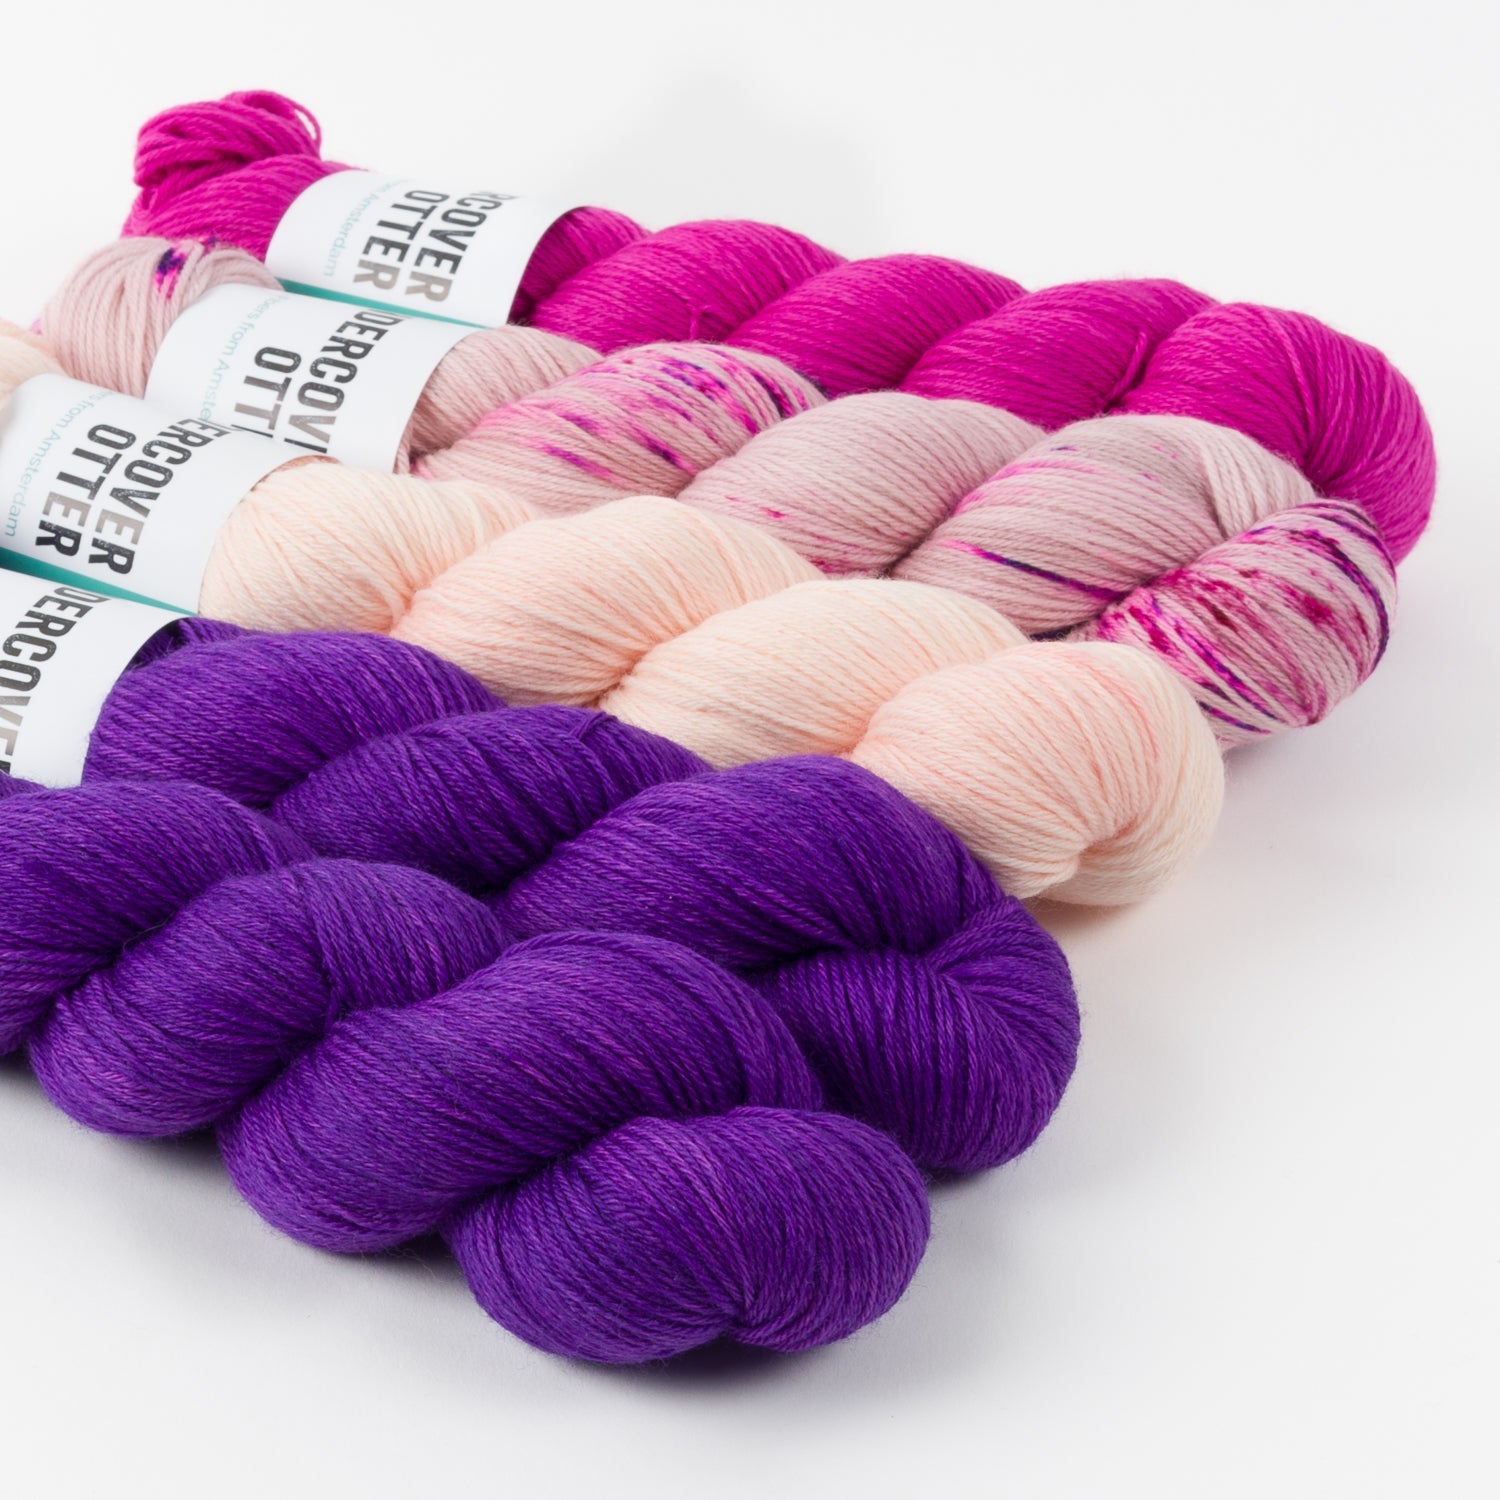 WESTKNITS KIT - ZUUL'S EXPORTS